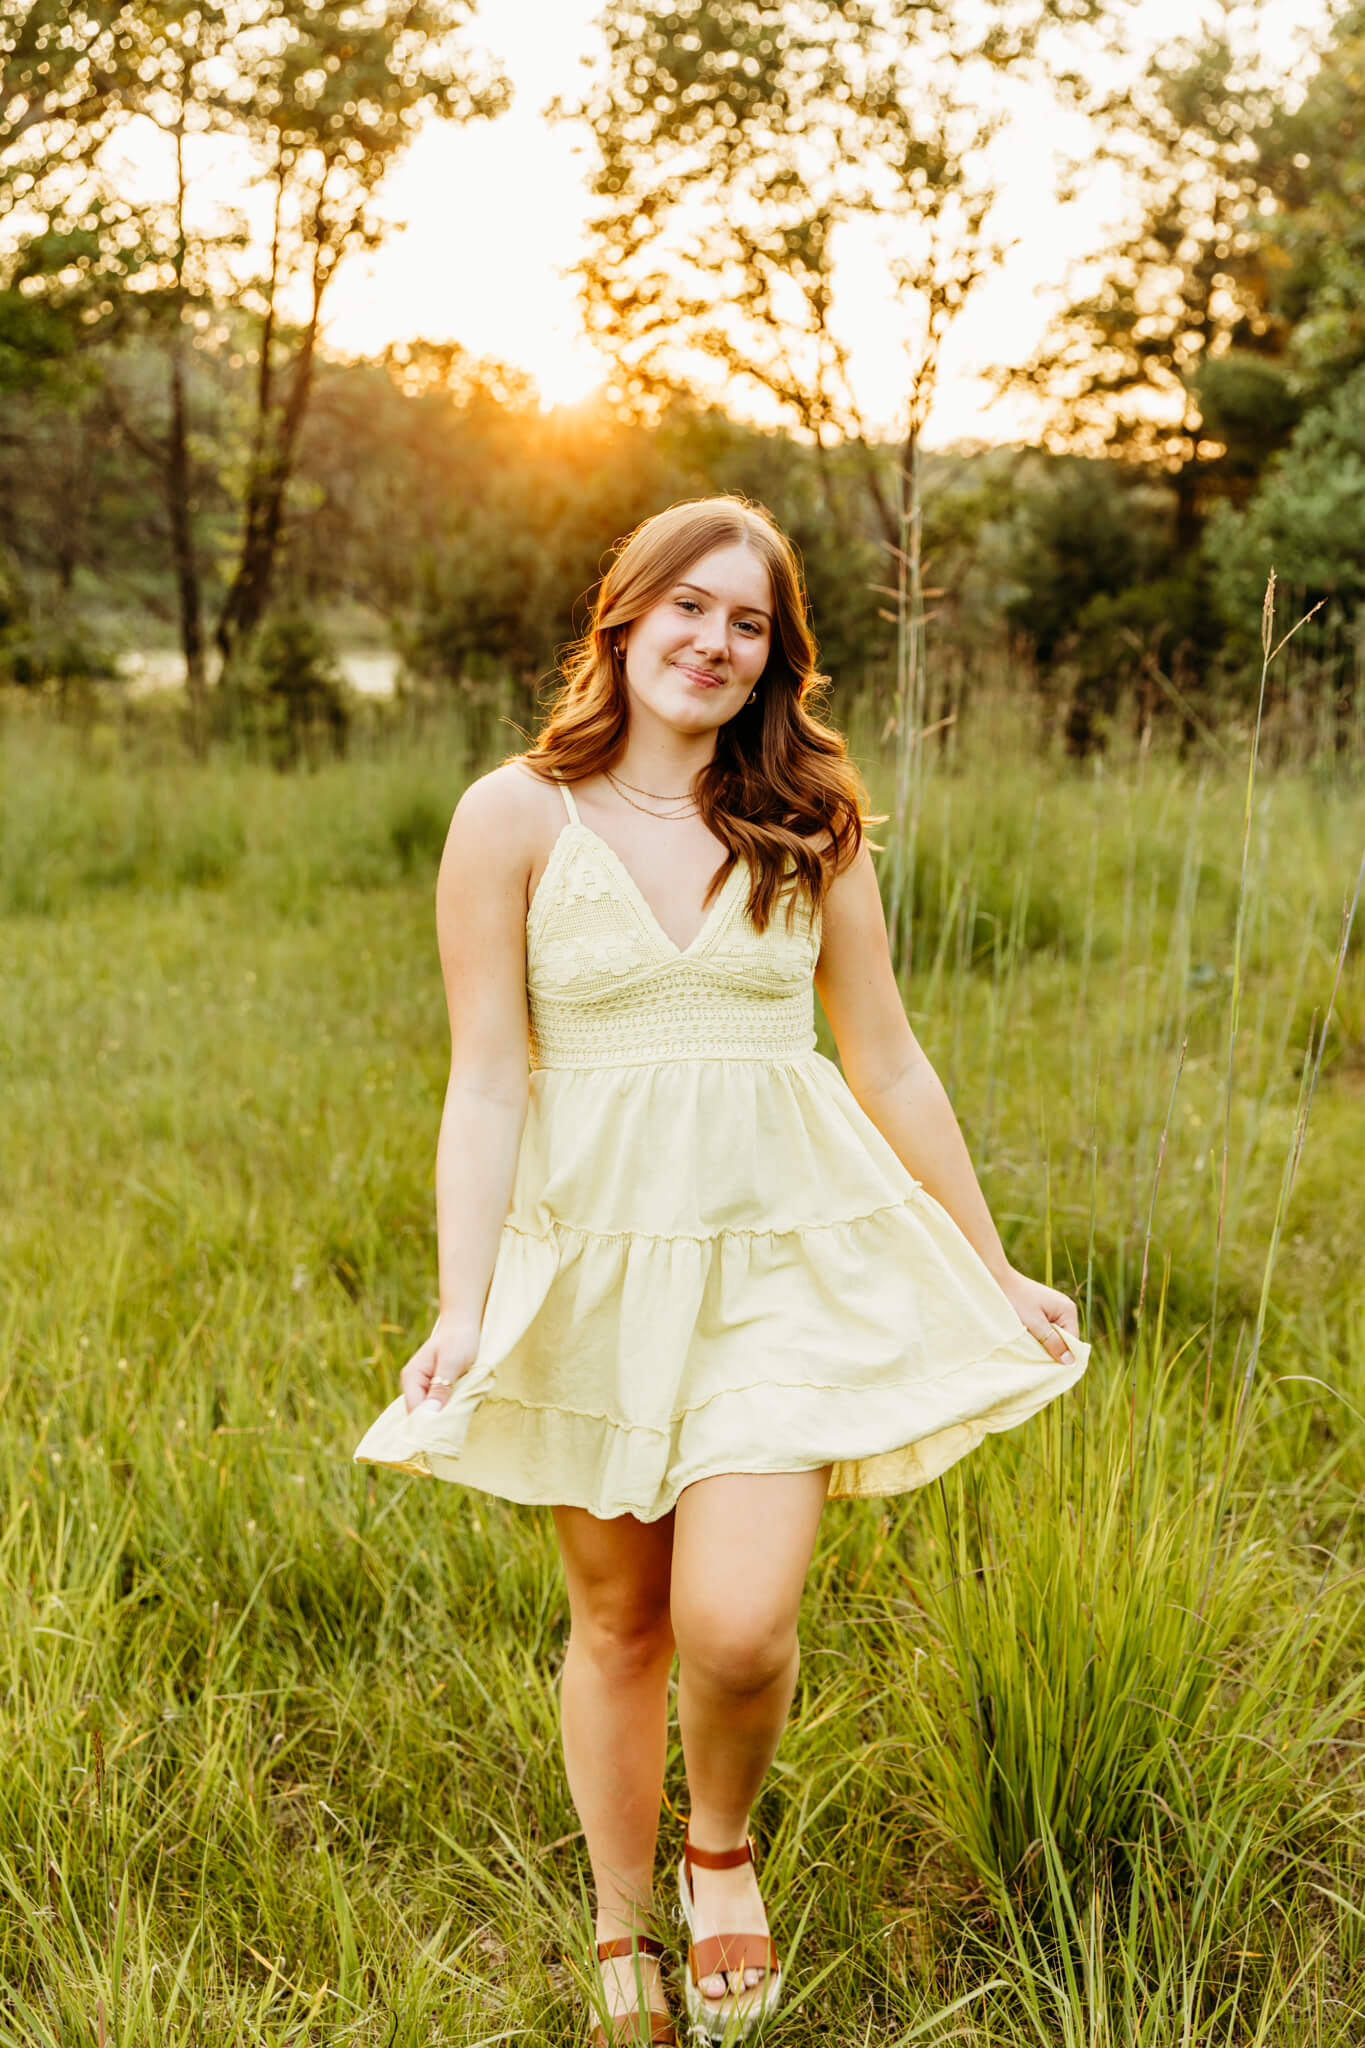 teen girl in a yellow dress walking through a grassy field at sunset for a blog post about Milwaukee Hair Salons